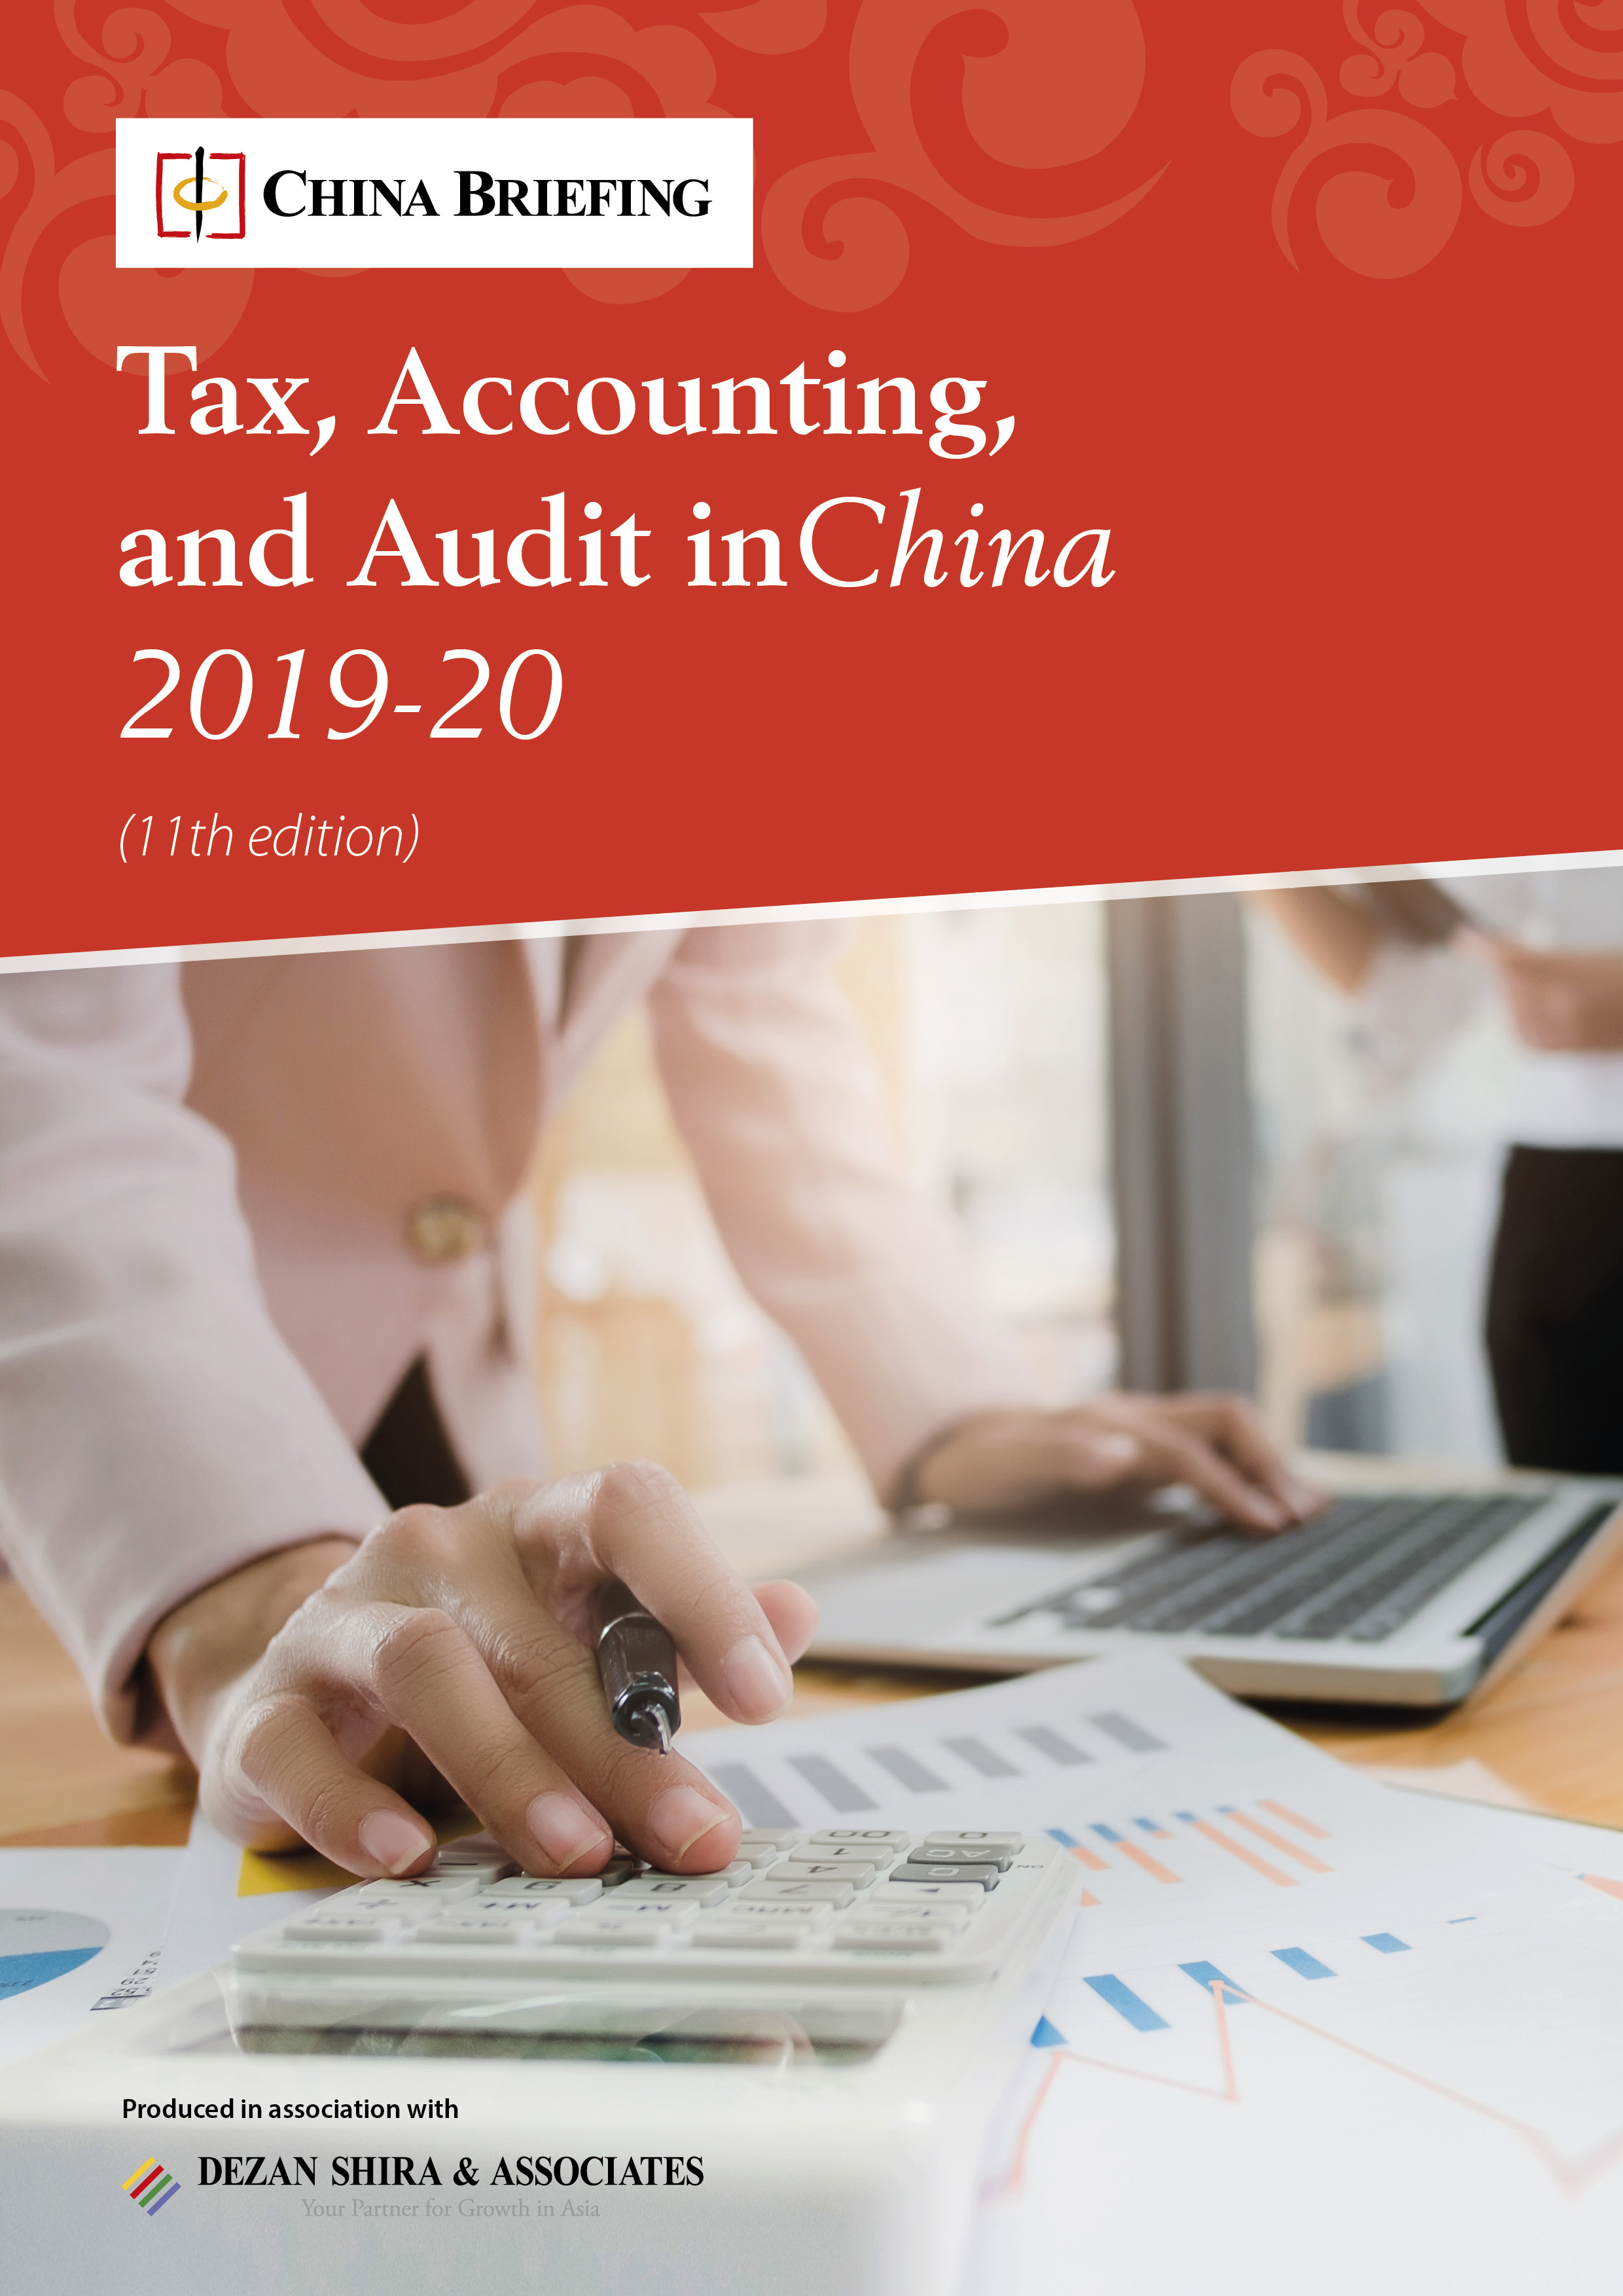 CB_Guide_Tax and Accounting_11 Edition_Cover China Briefing News